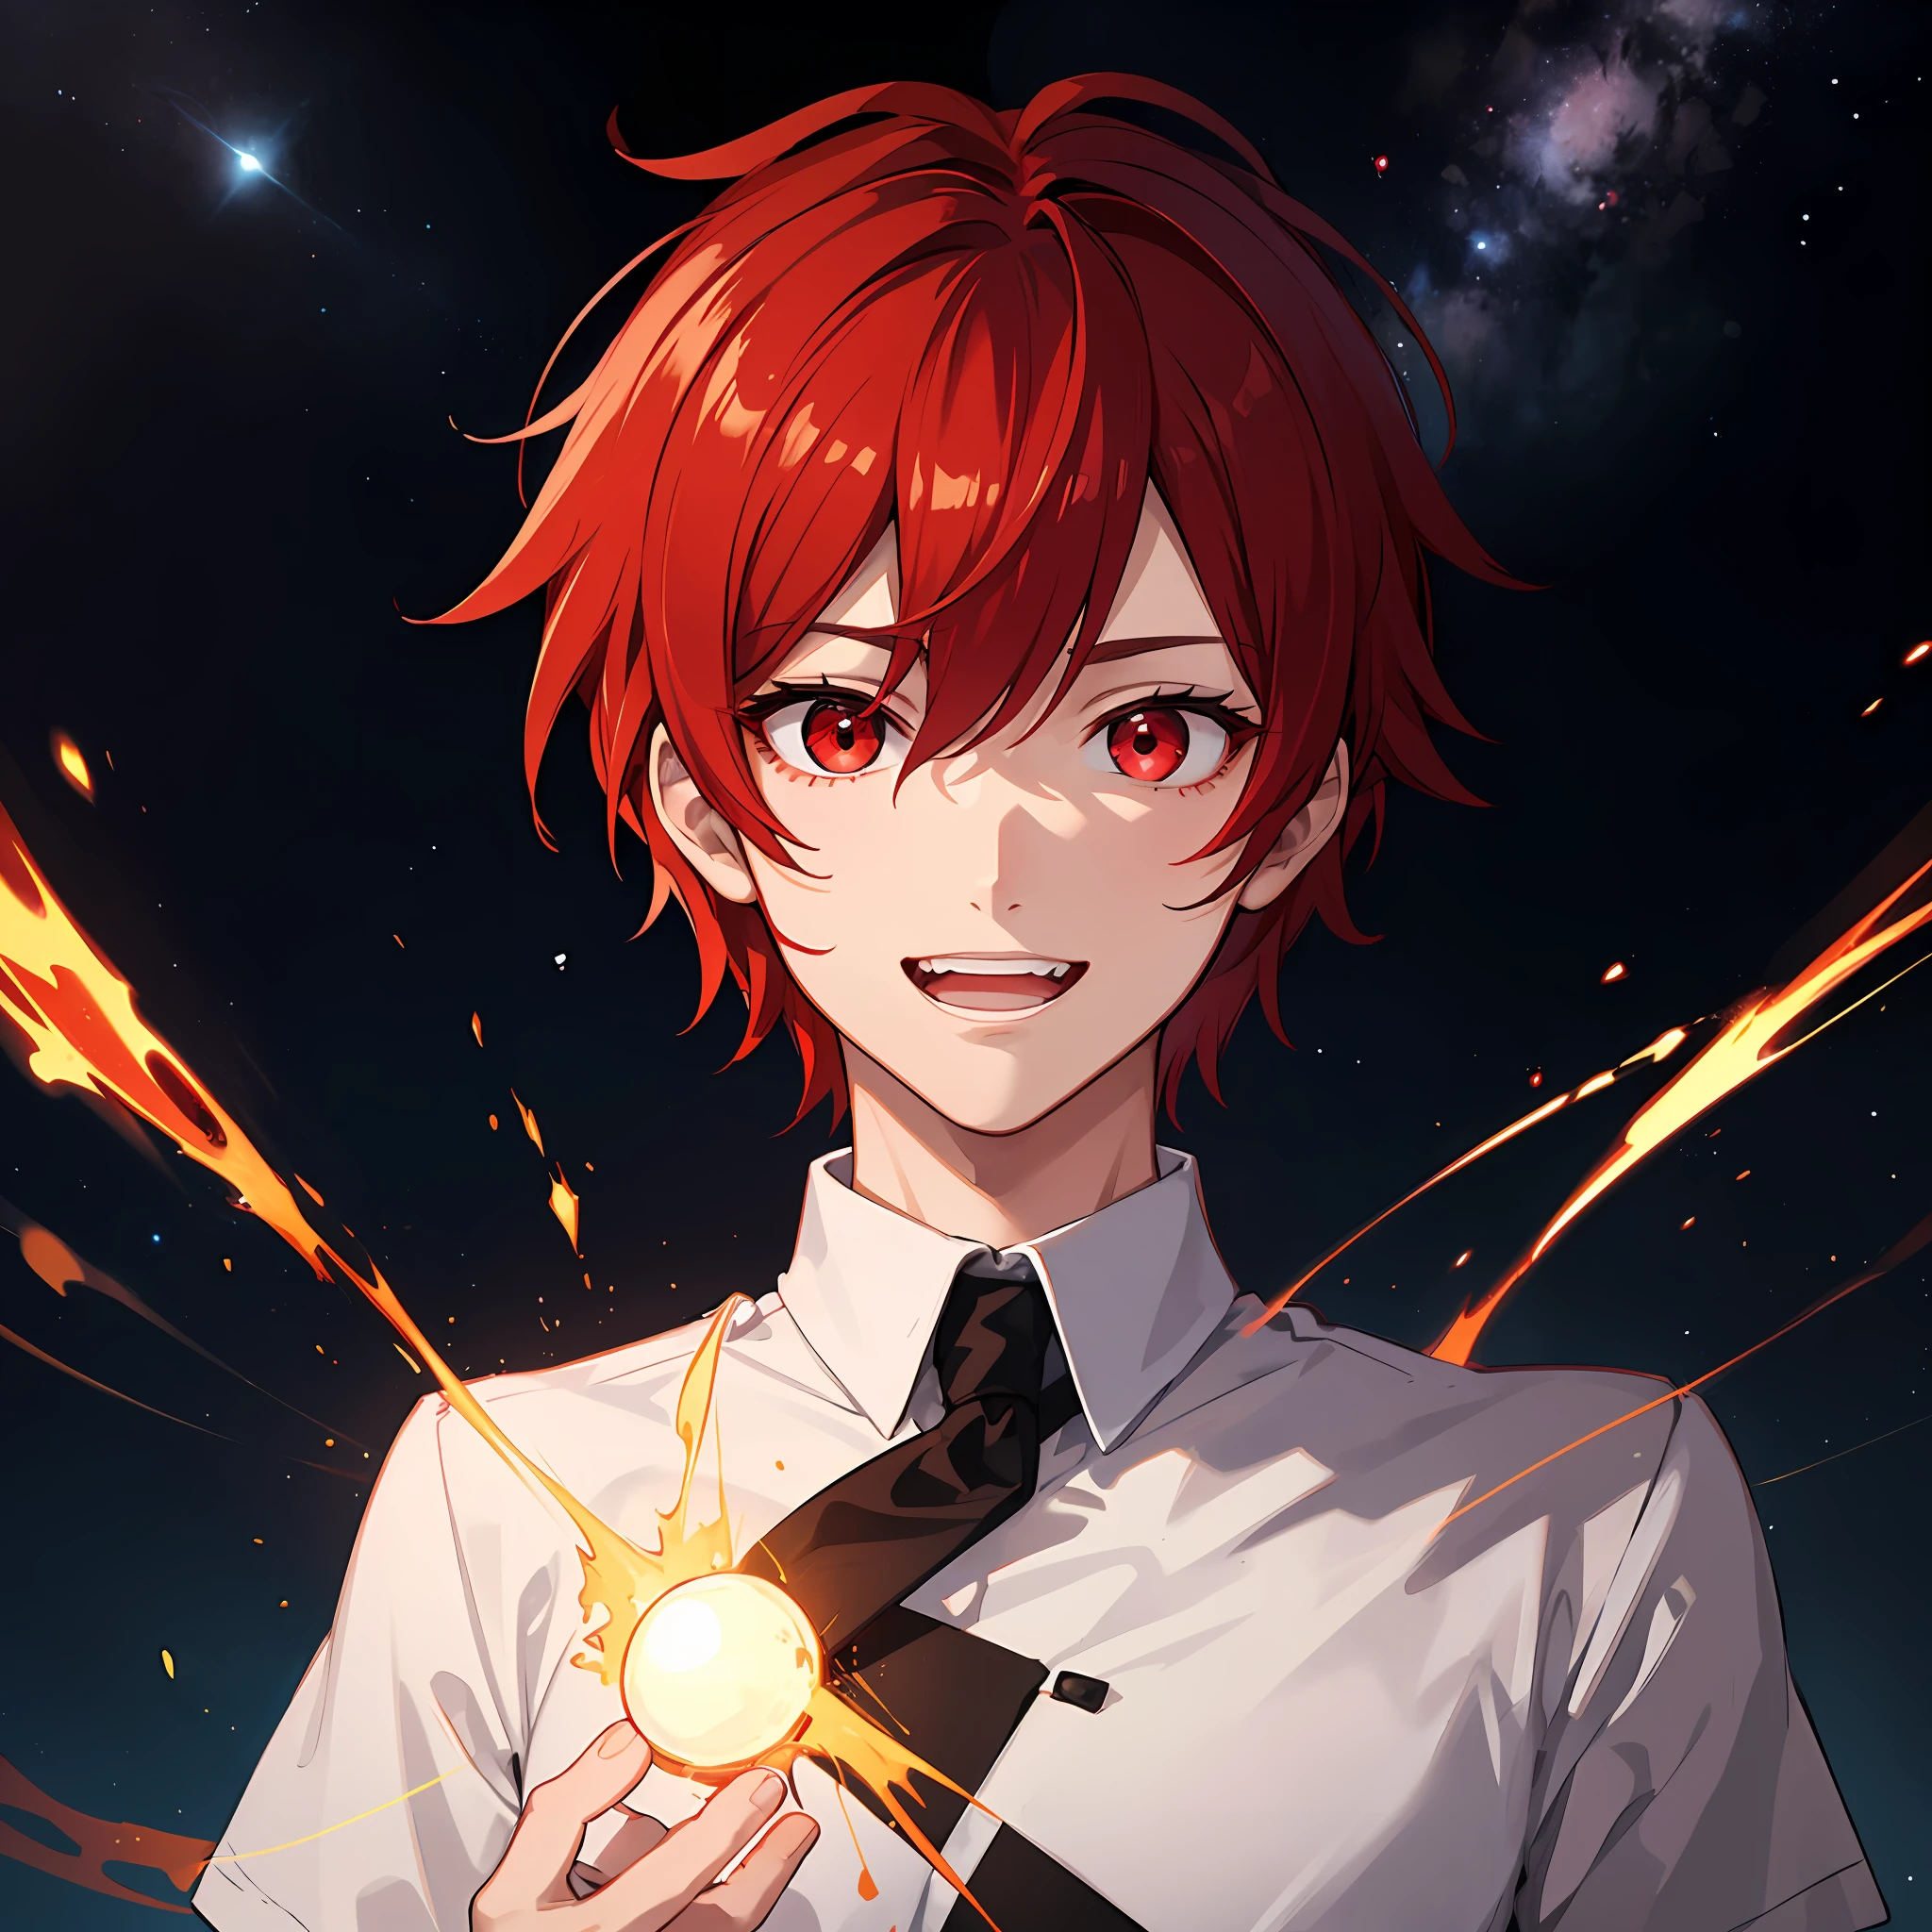 top-quality、ultra-detailliert、animesque、red eyes、Red-haired、Partially black hair、1 male、Crazy smile、White teeth、Red glowing red eyes、spacetime、shock waves、kosmos、short-hair、Men's Hairstyleedium hair